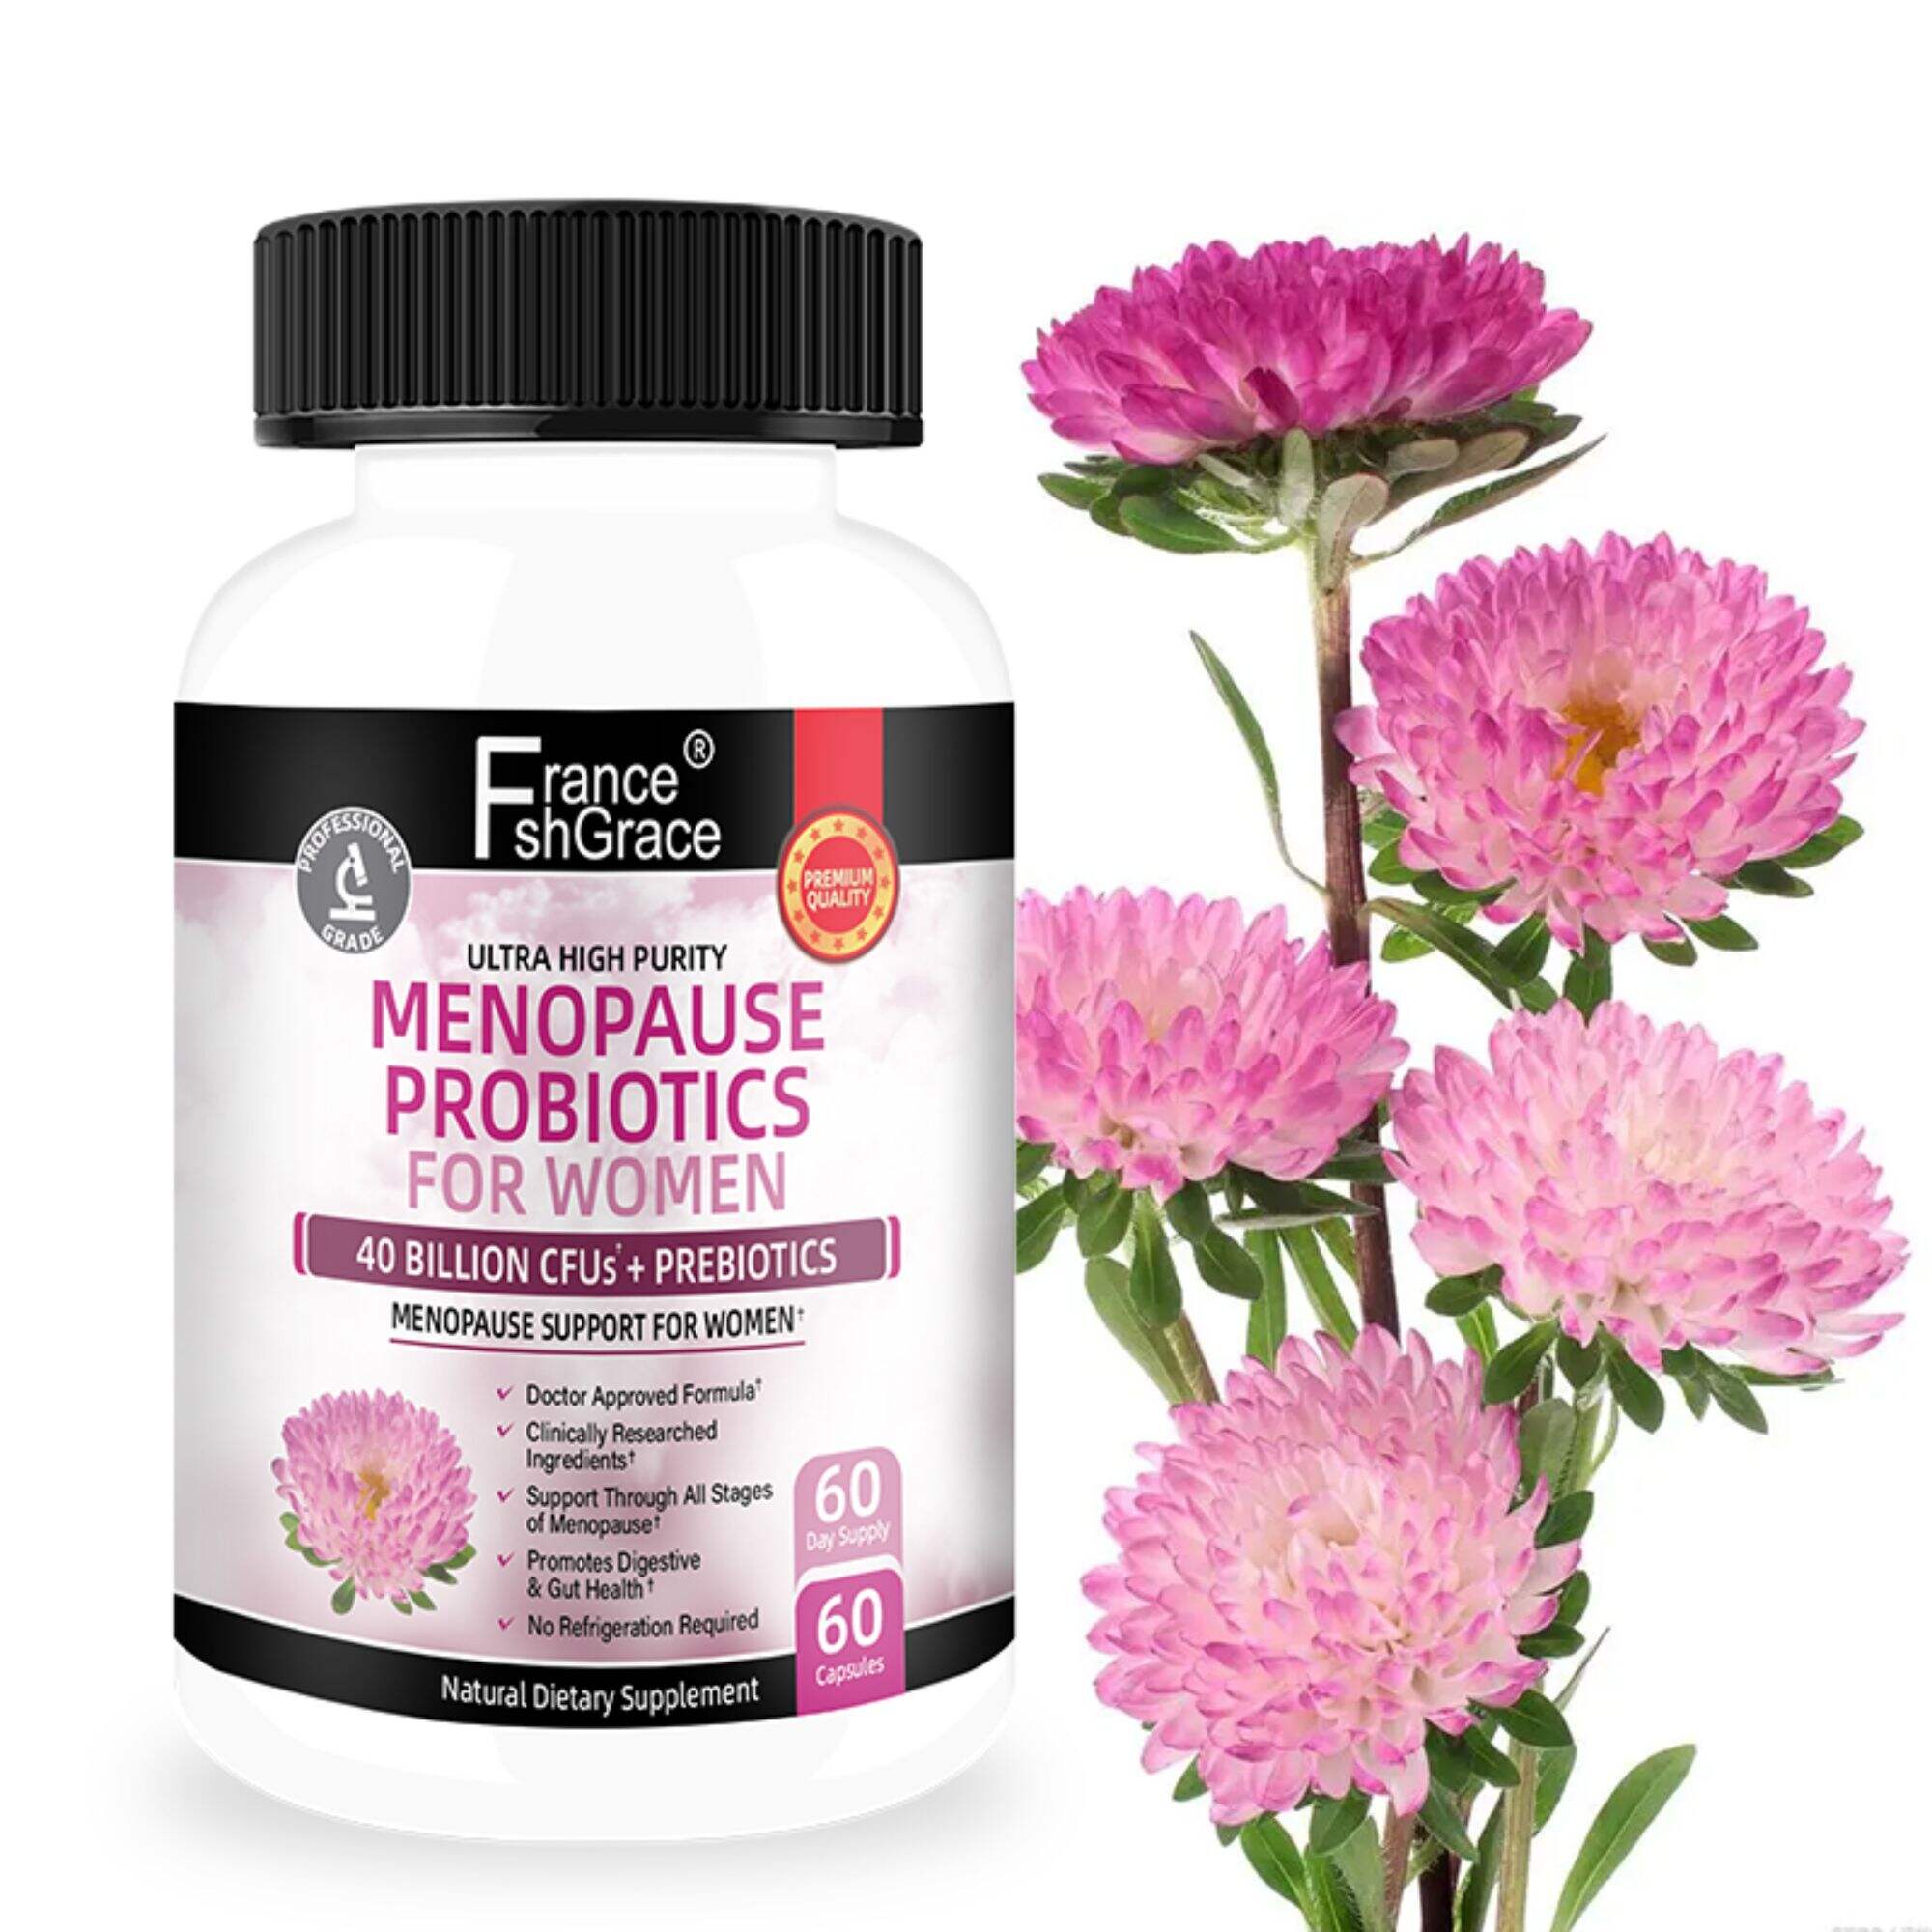 Women's Menopause Support Probiotic - Unique Menopause Relief Hot Flashes, Night Sweats, Mood Swings and Hormone Balance - Women's Menopause Supplement Astragalus - 60 Tablets 60 Servings